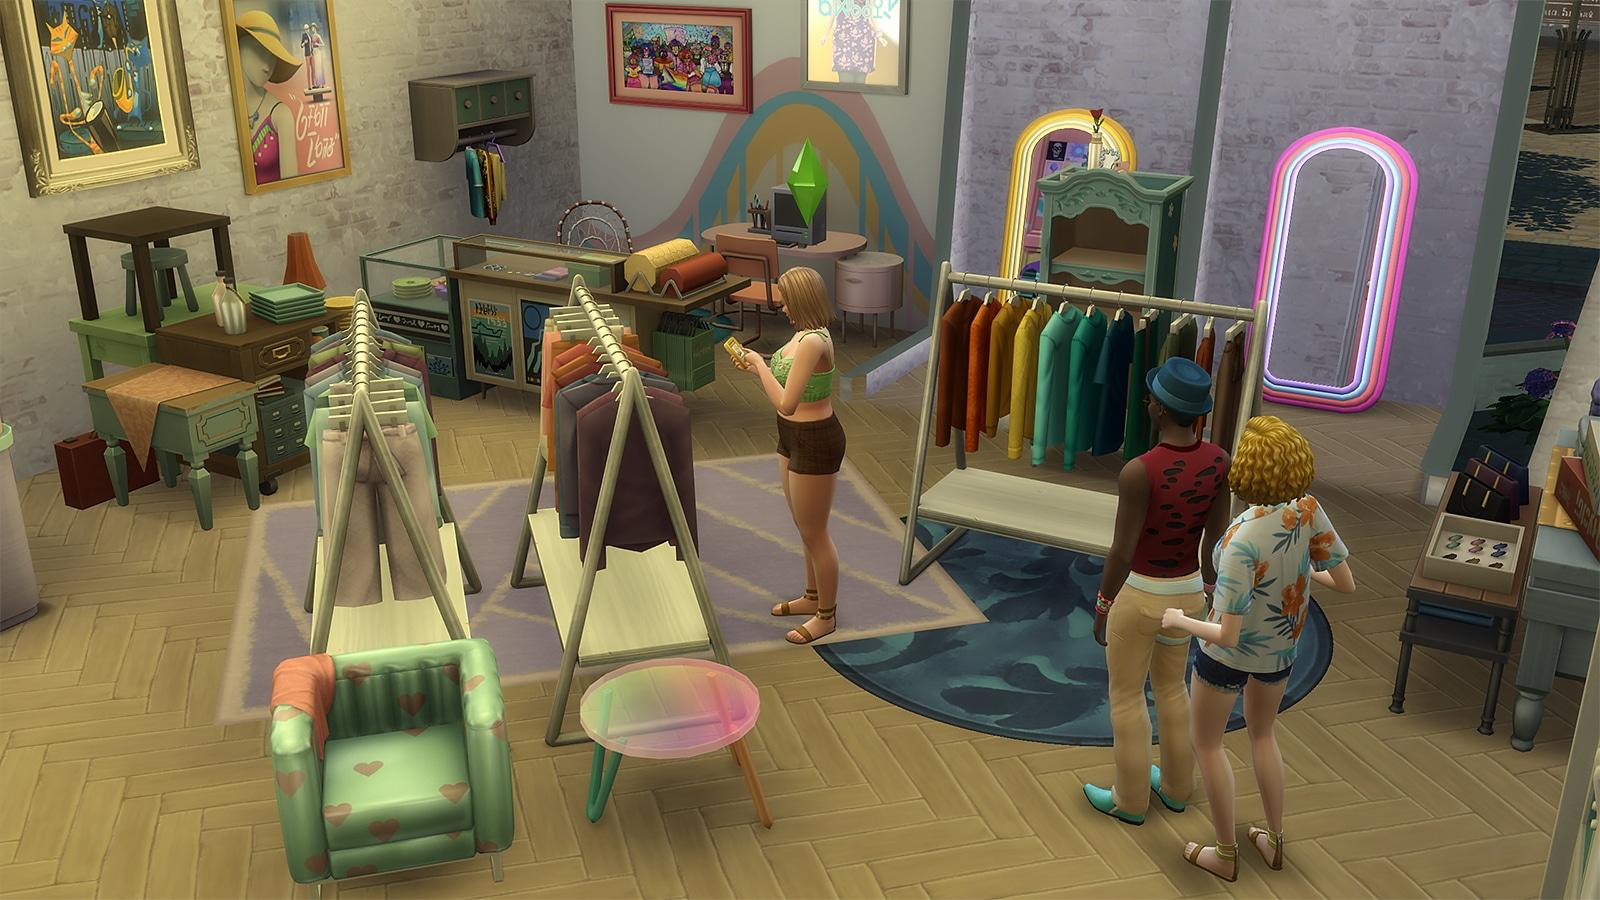 The Sims 4' cheat codes for baking and photography skills